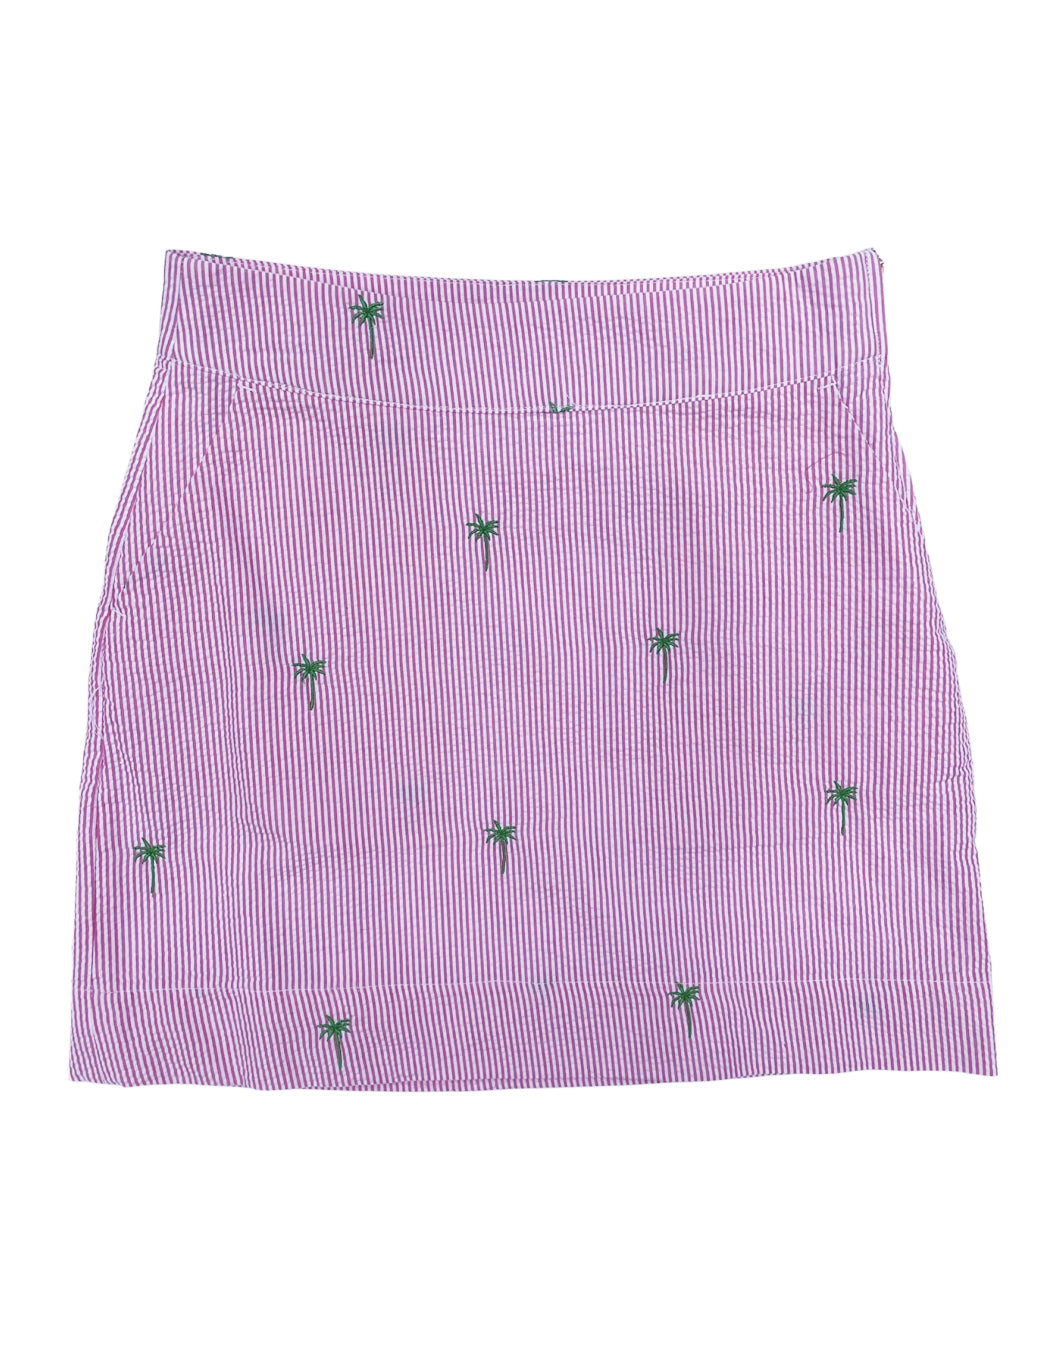 Hot Pink Seersucker Women's Skirt with Green Embroidered Palm Trees